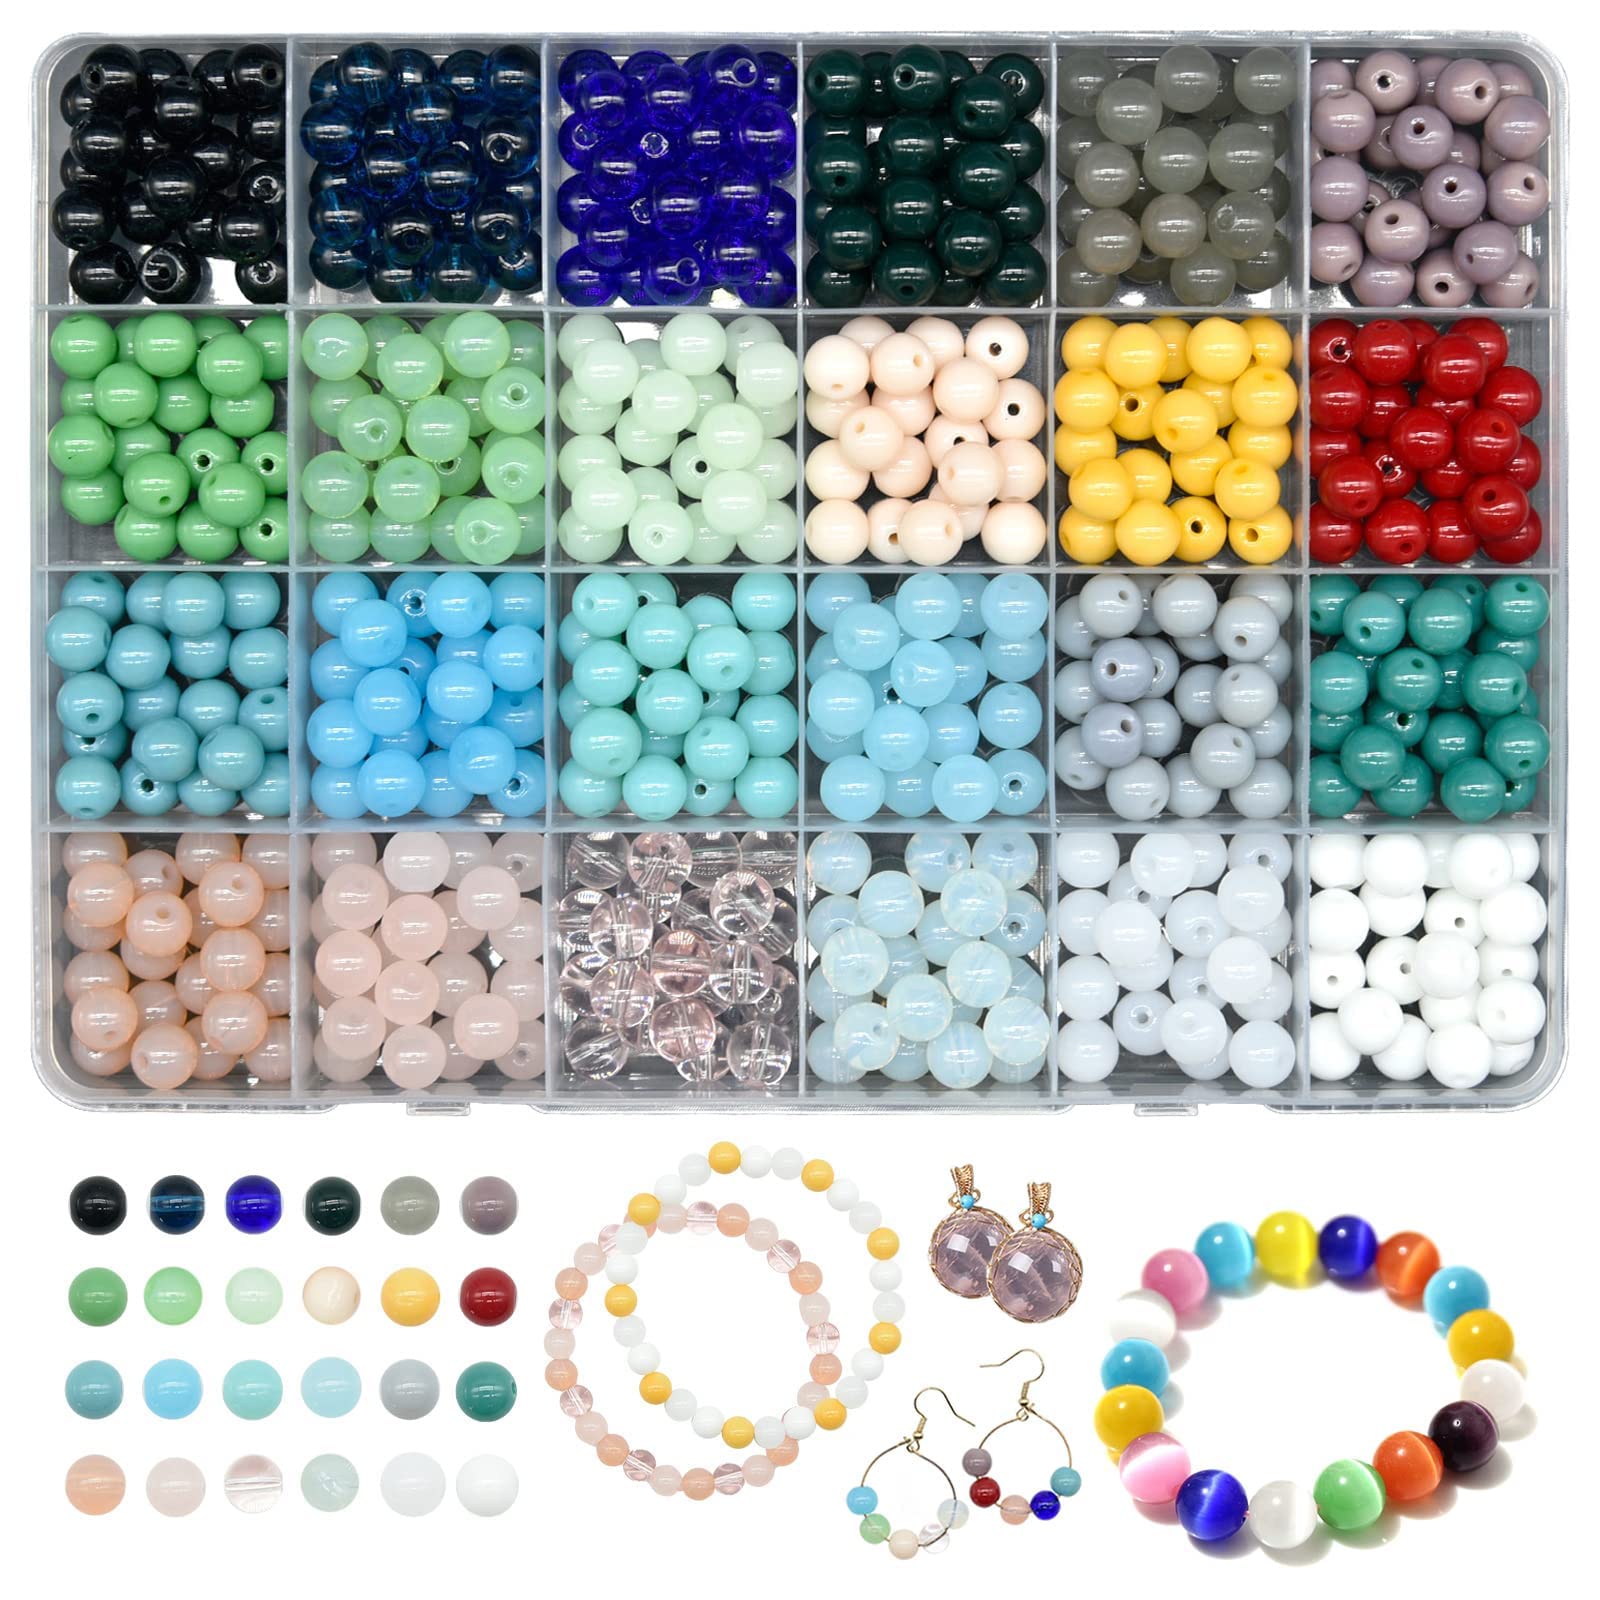 KOTHER 600PCS Glass Beads for Jewelry Making, 8mm DIY Glass Gemstone Beads  Bracelet Making Kit Healing Chakra Beads, 24 Color Round Gemstone Beads  Suitable for Beginners Glass Beads kits